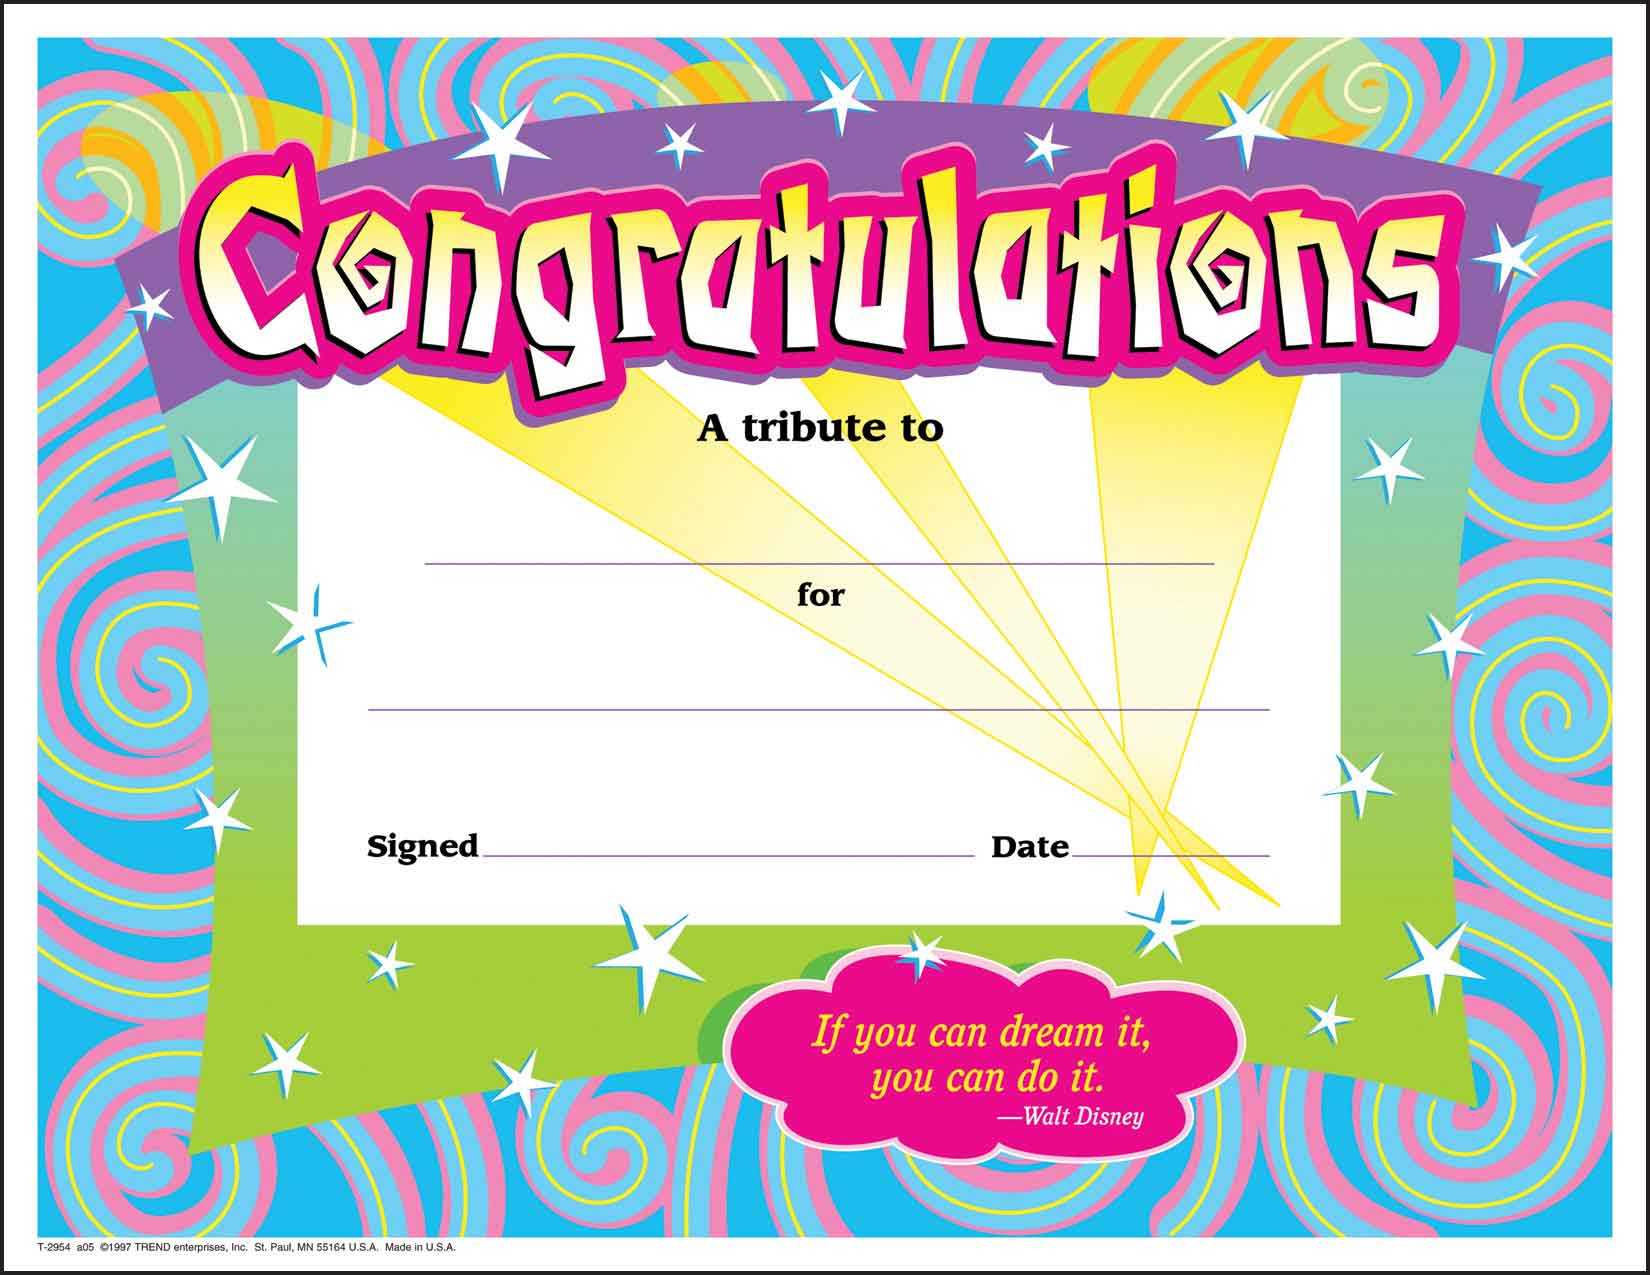 30 Congratulations Awards (Large) Swirl Certificate Pack With Free Printable Funny Certificate Templates